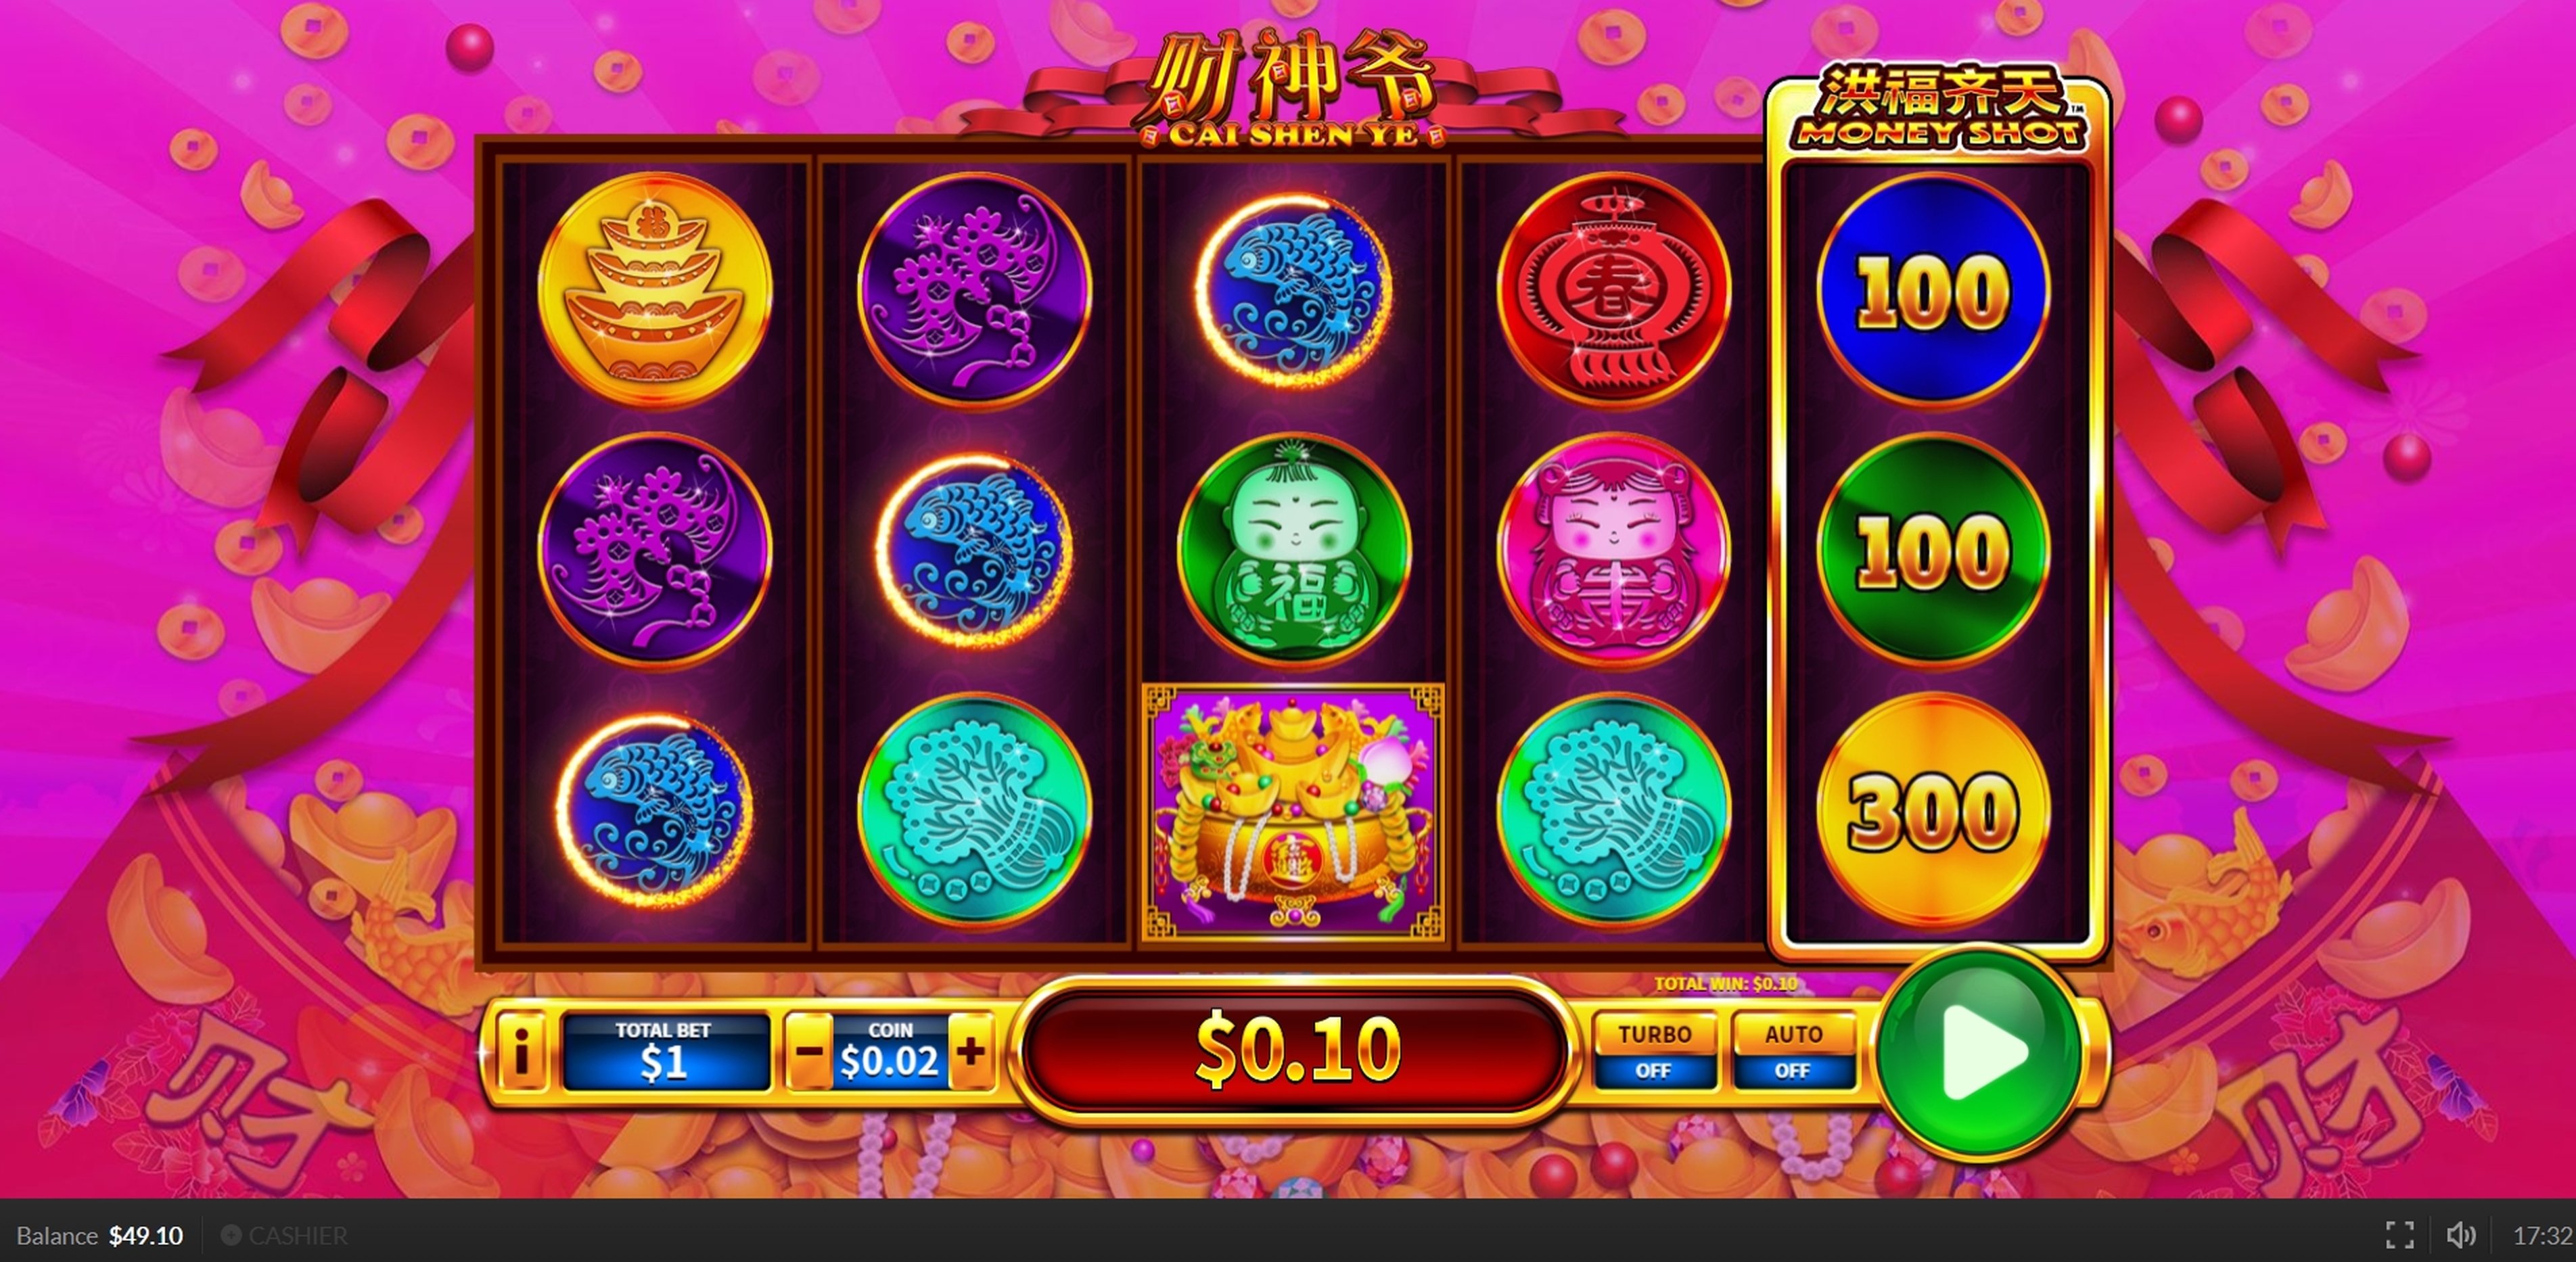 Win Money in Cai Shen Ye Free Slot Game by Skywind